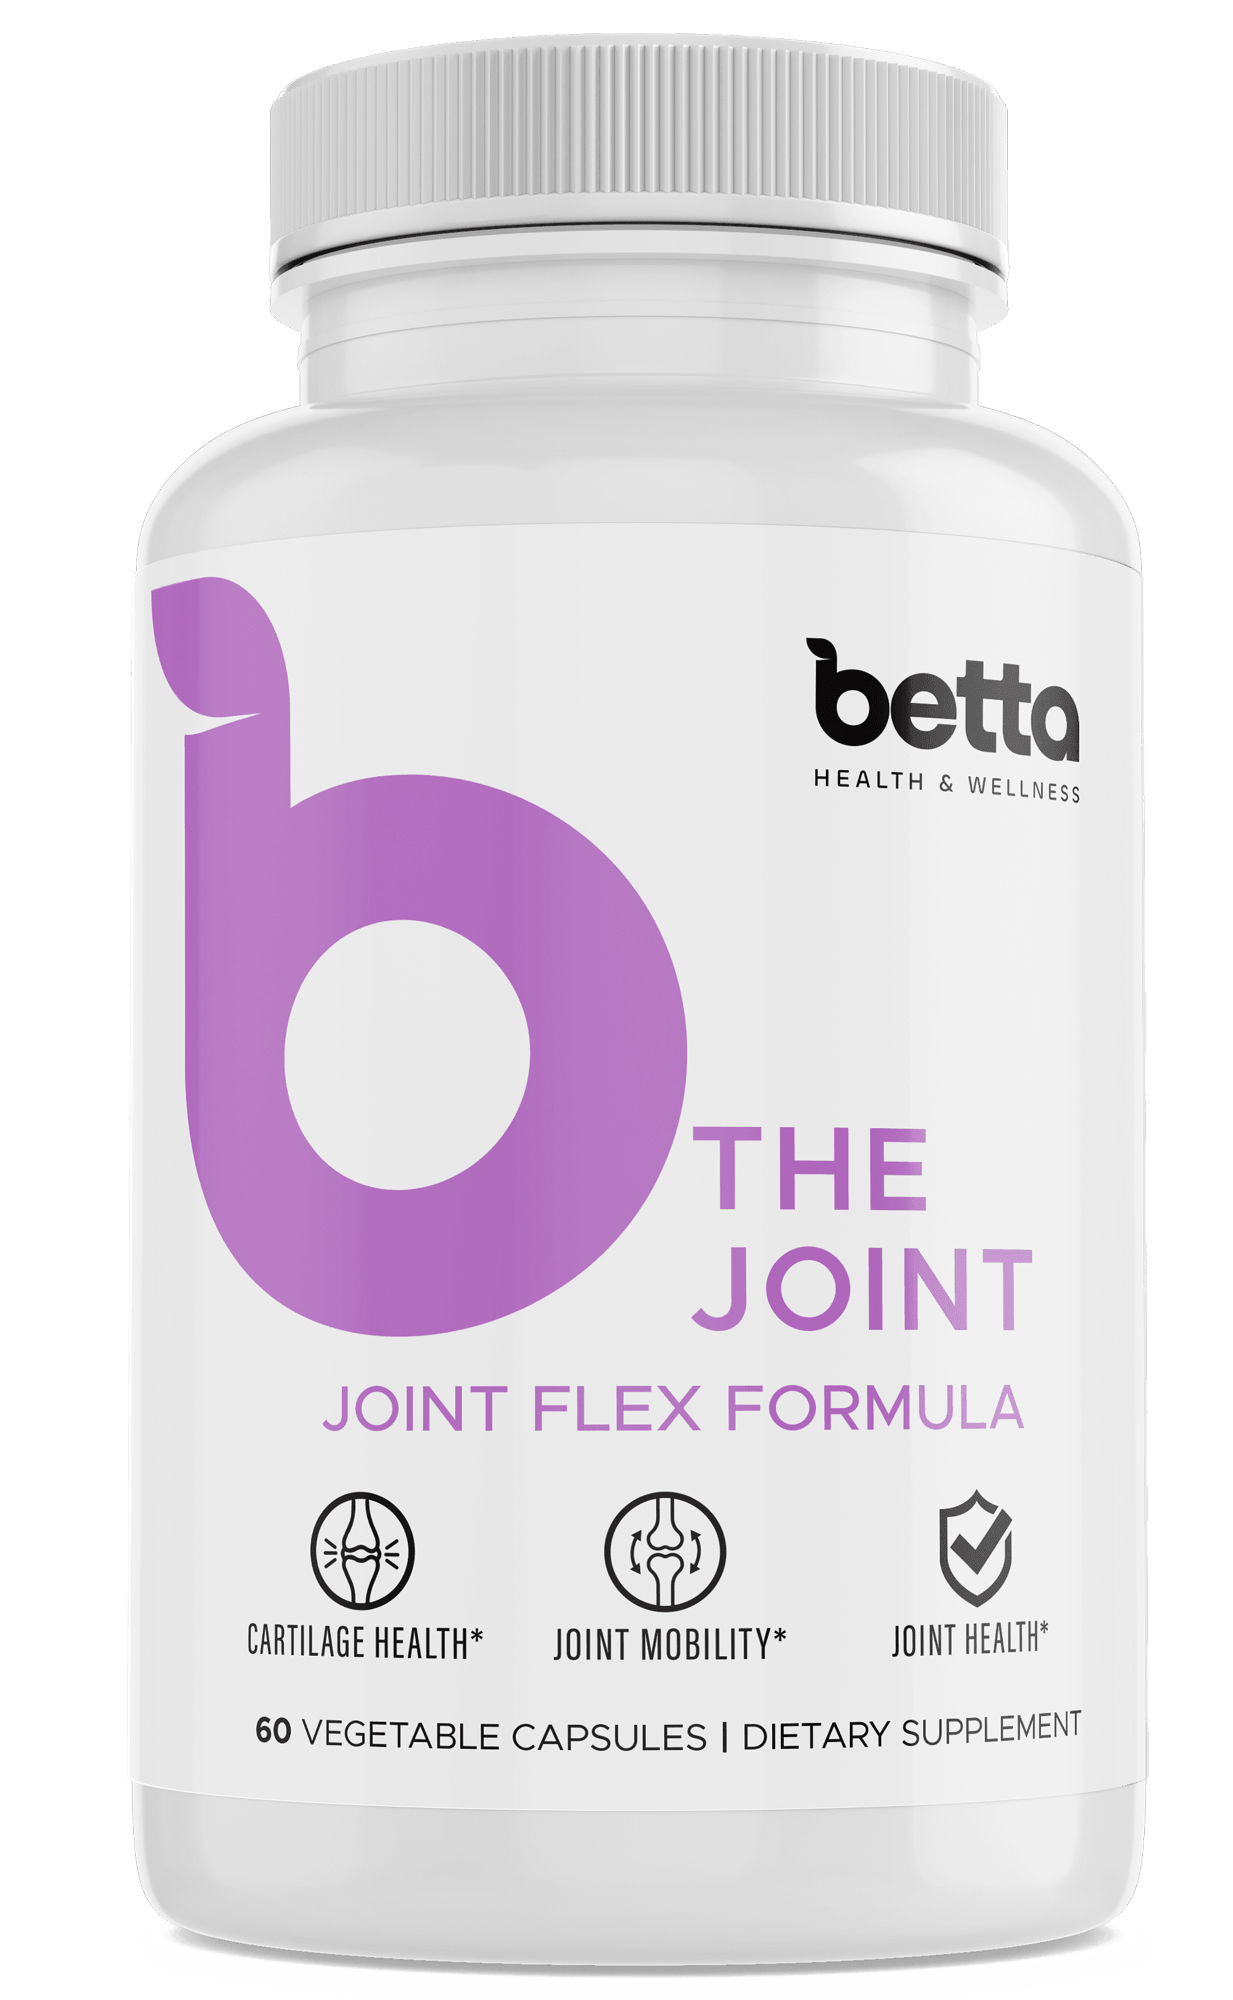 Joint health and wellness